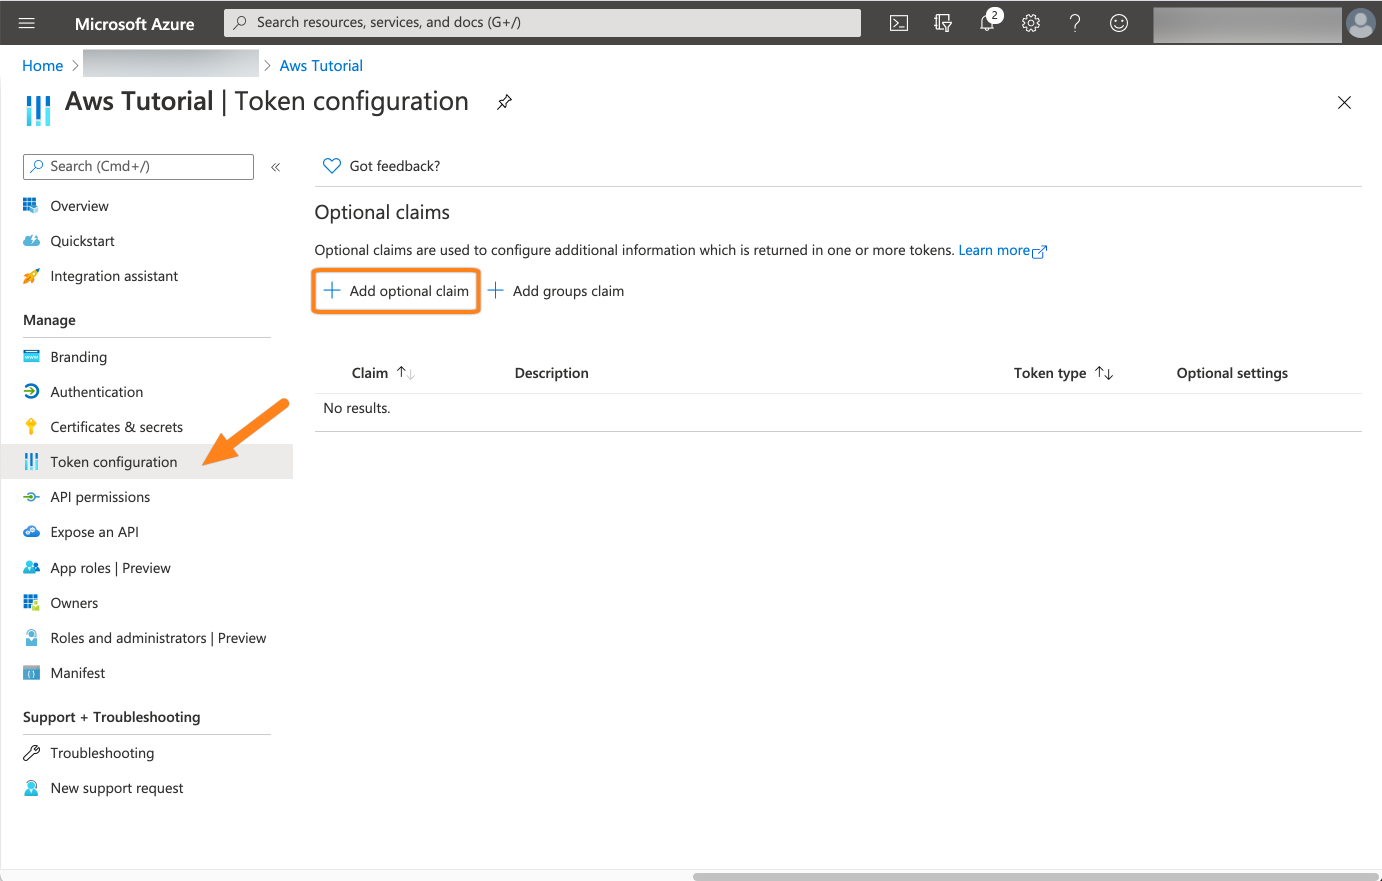 Go to token configuration and click add optional claim